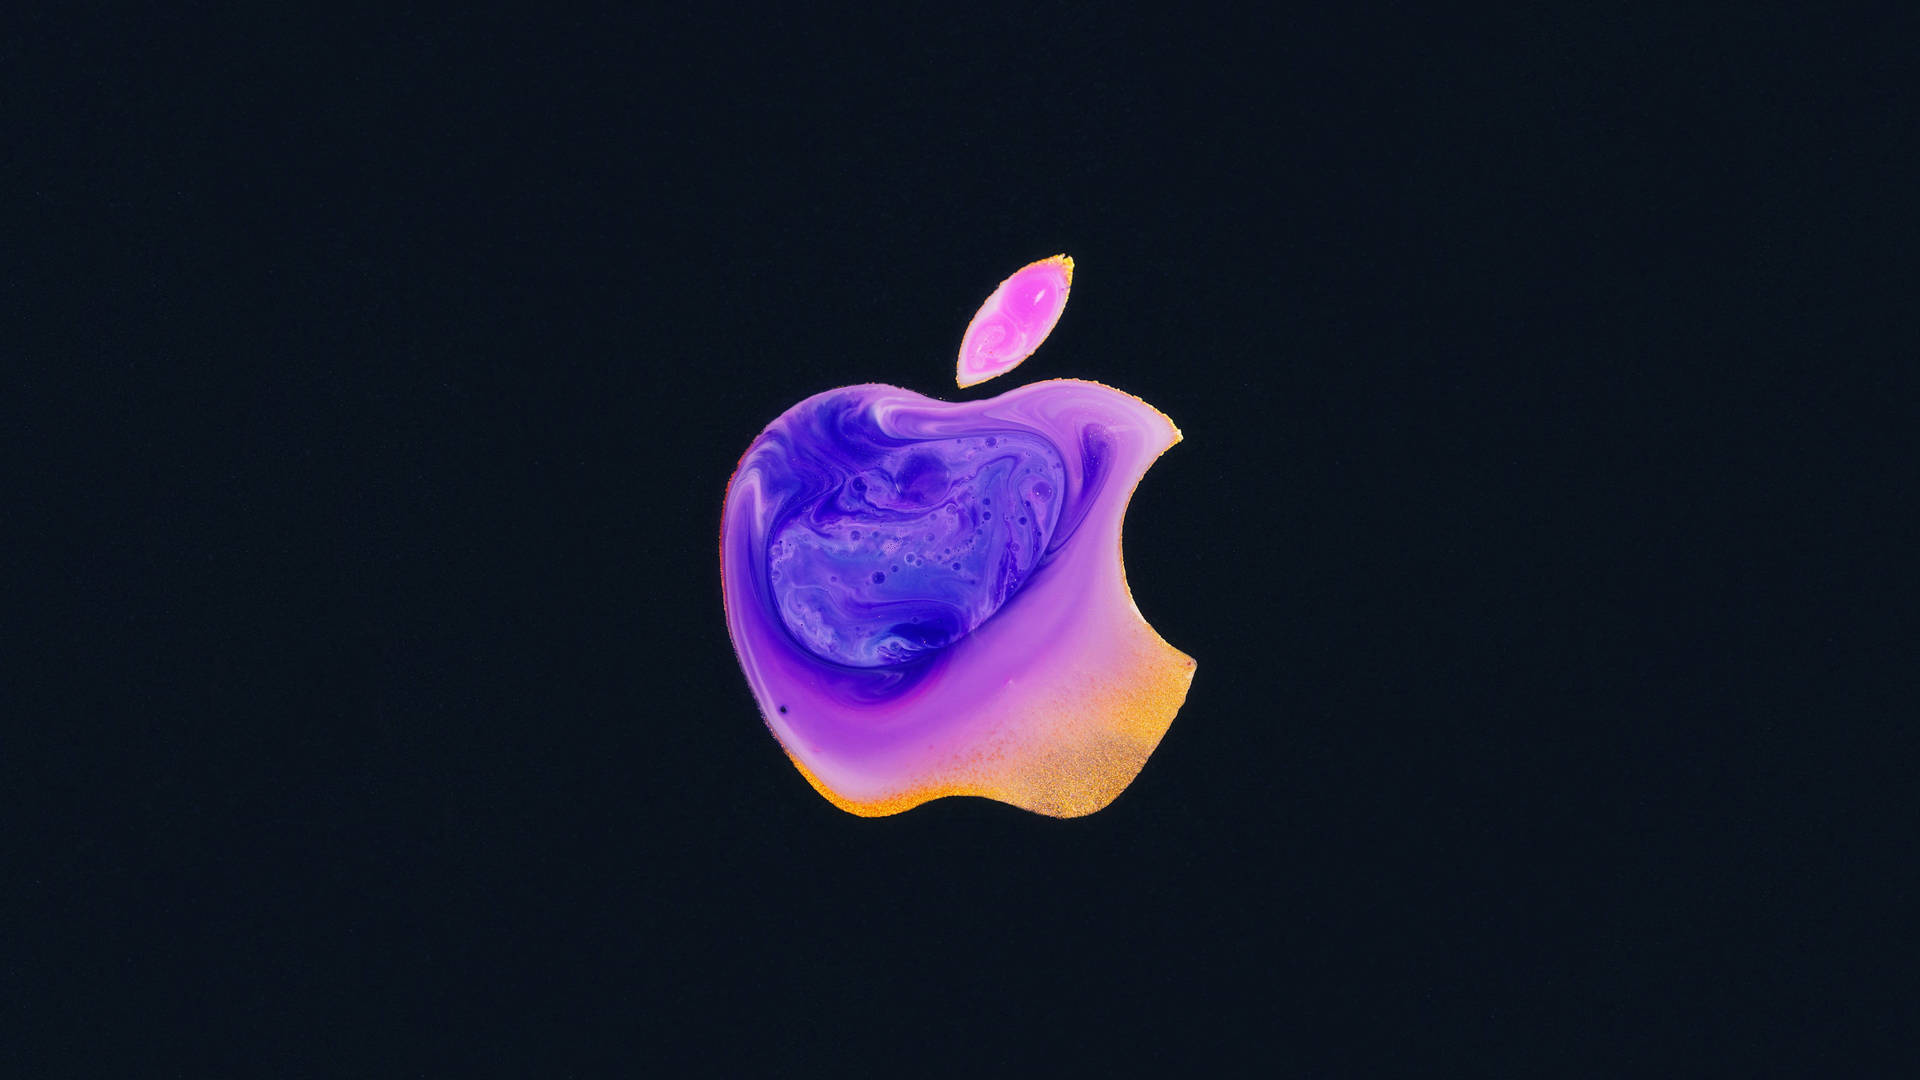 Full Hd Apple With Marble Design Wallpaper